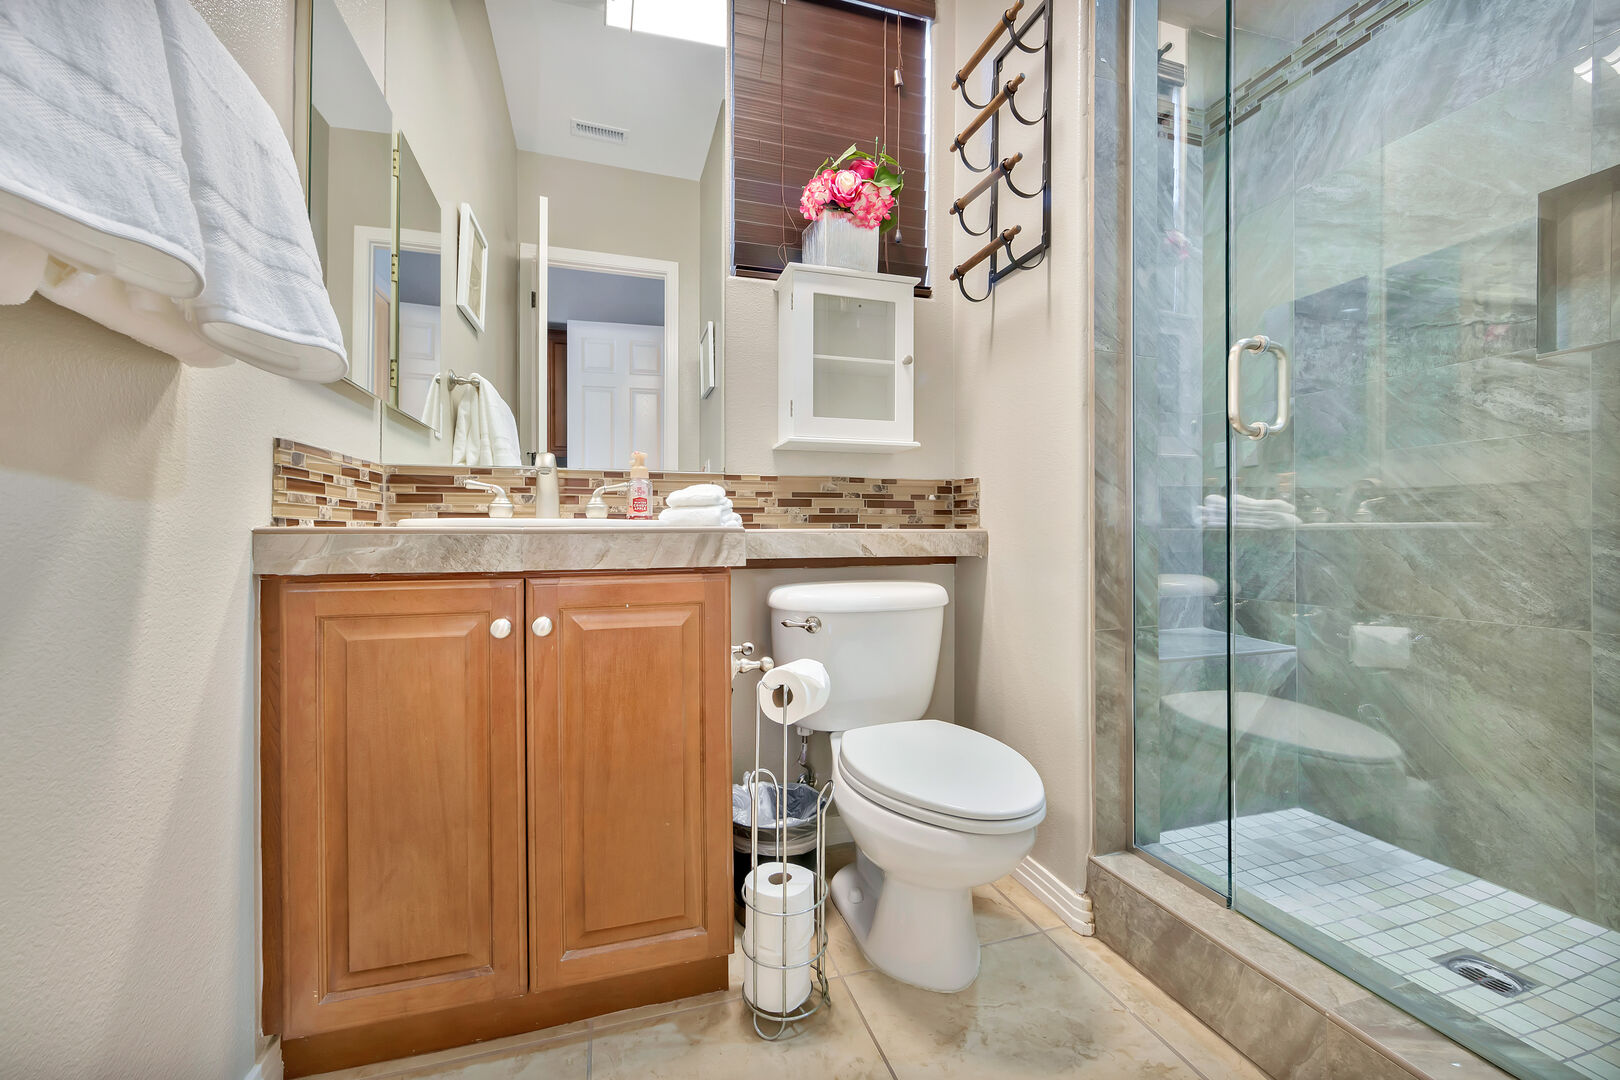 Suite 2 private, en suite bathroom features a tile shower and double vanity sinks.